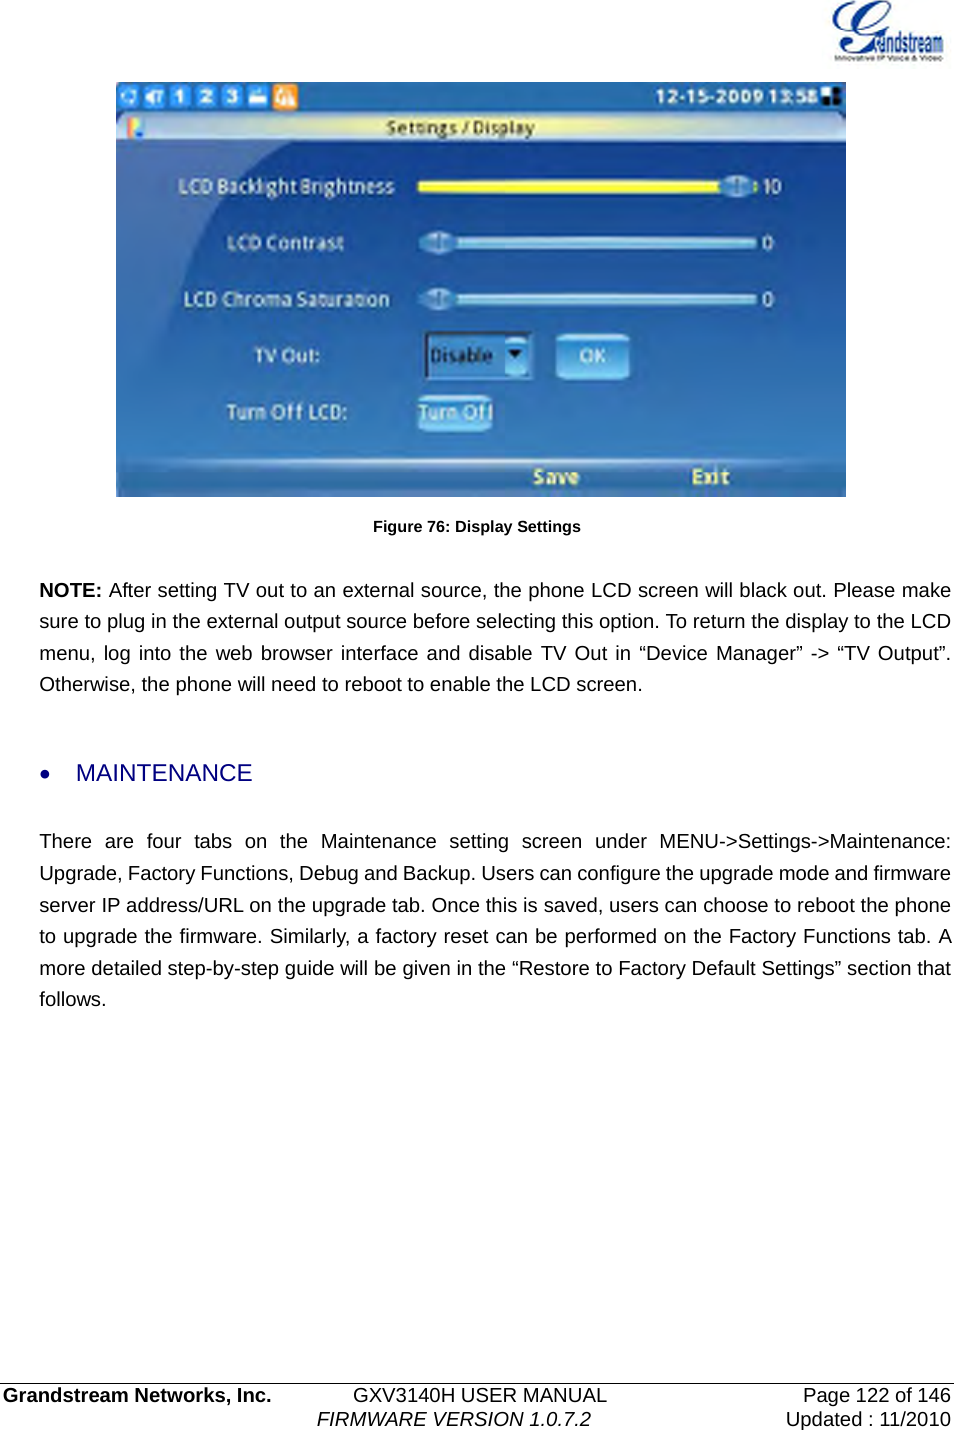   Grandstream Networks, Inc.        GXV3140H USER MANUAL                  Page 122 of 146                                FIRMWARE VERSION 1.0.7.2 Updated : 11/2010   Figure 76: Display Settings  NOTE: After setting TV out to an external source, the phone LCD screen will black out. Please make sure to plug in the external output source before selecting this option. To return the display to the LCD menu, log into the web browser interface and disable TV Out in “Device Manager” -&gt; “TV Output”. Otherwise, the phone will need to reboot to enable the LCD screen.  • MAINTENANCE  There are four tabs on the Maintenance setting screen under MENU-&gt;Settings-&gt;Maintenance: Upgrade, Factory Functions, Debug and Backup. Users can configure the upgrade mode and firmware server IP address/URL on the upgrade tab. Once this is saved, users can choose to reboot the phone to upgrade the firmware. Similarly, a factory reset can be performed on the Factory Functions tab. A more detailed step-by-step guide will be given in the “Restore to Factory Default Settings” section that follows. 